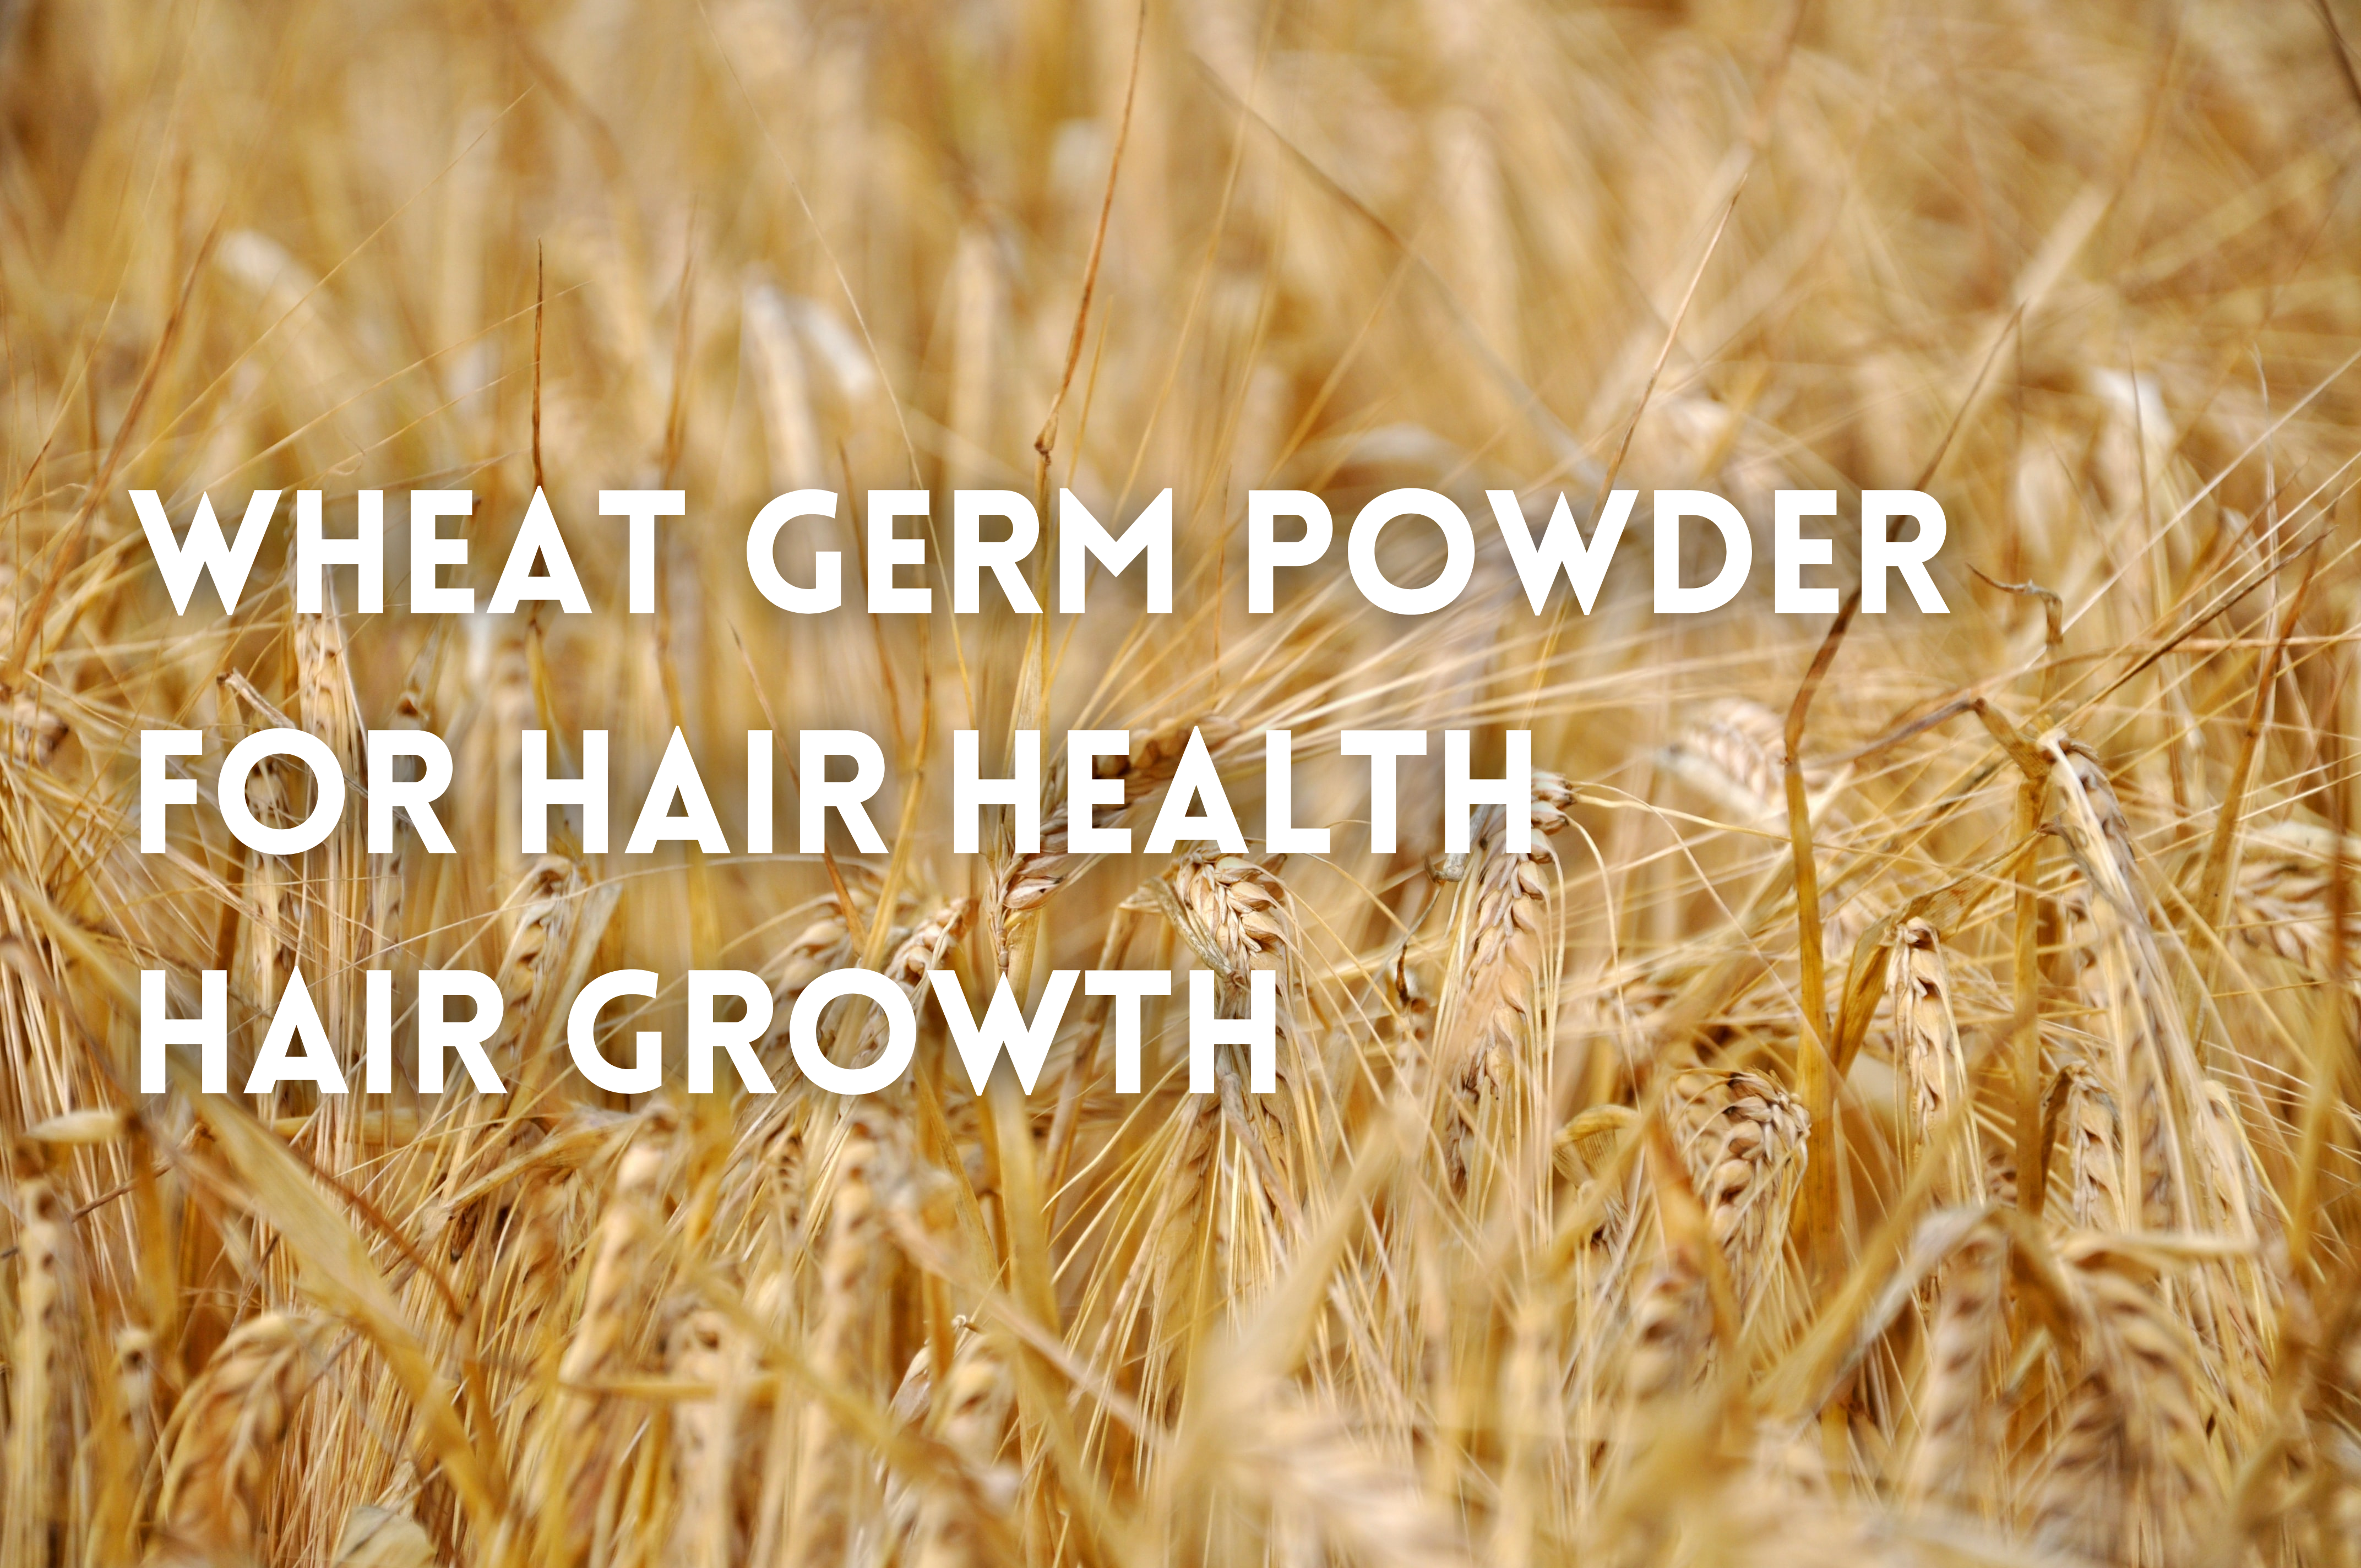 VIDEO: Wheat Germ for Hair: Benefits, Studies, and More